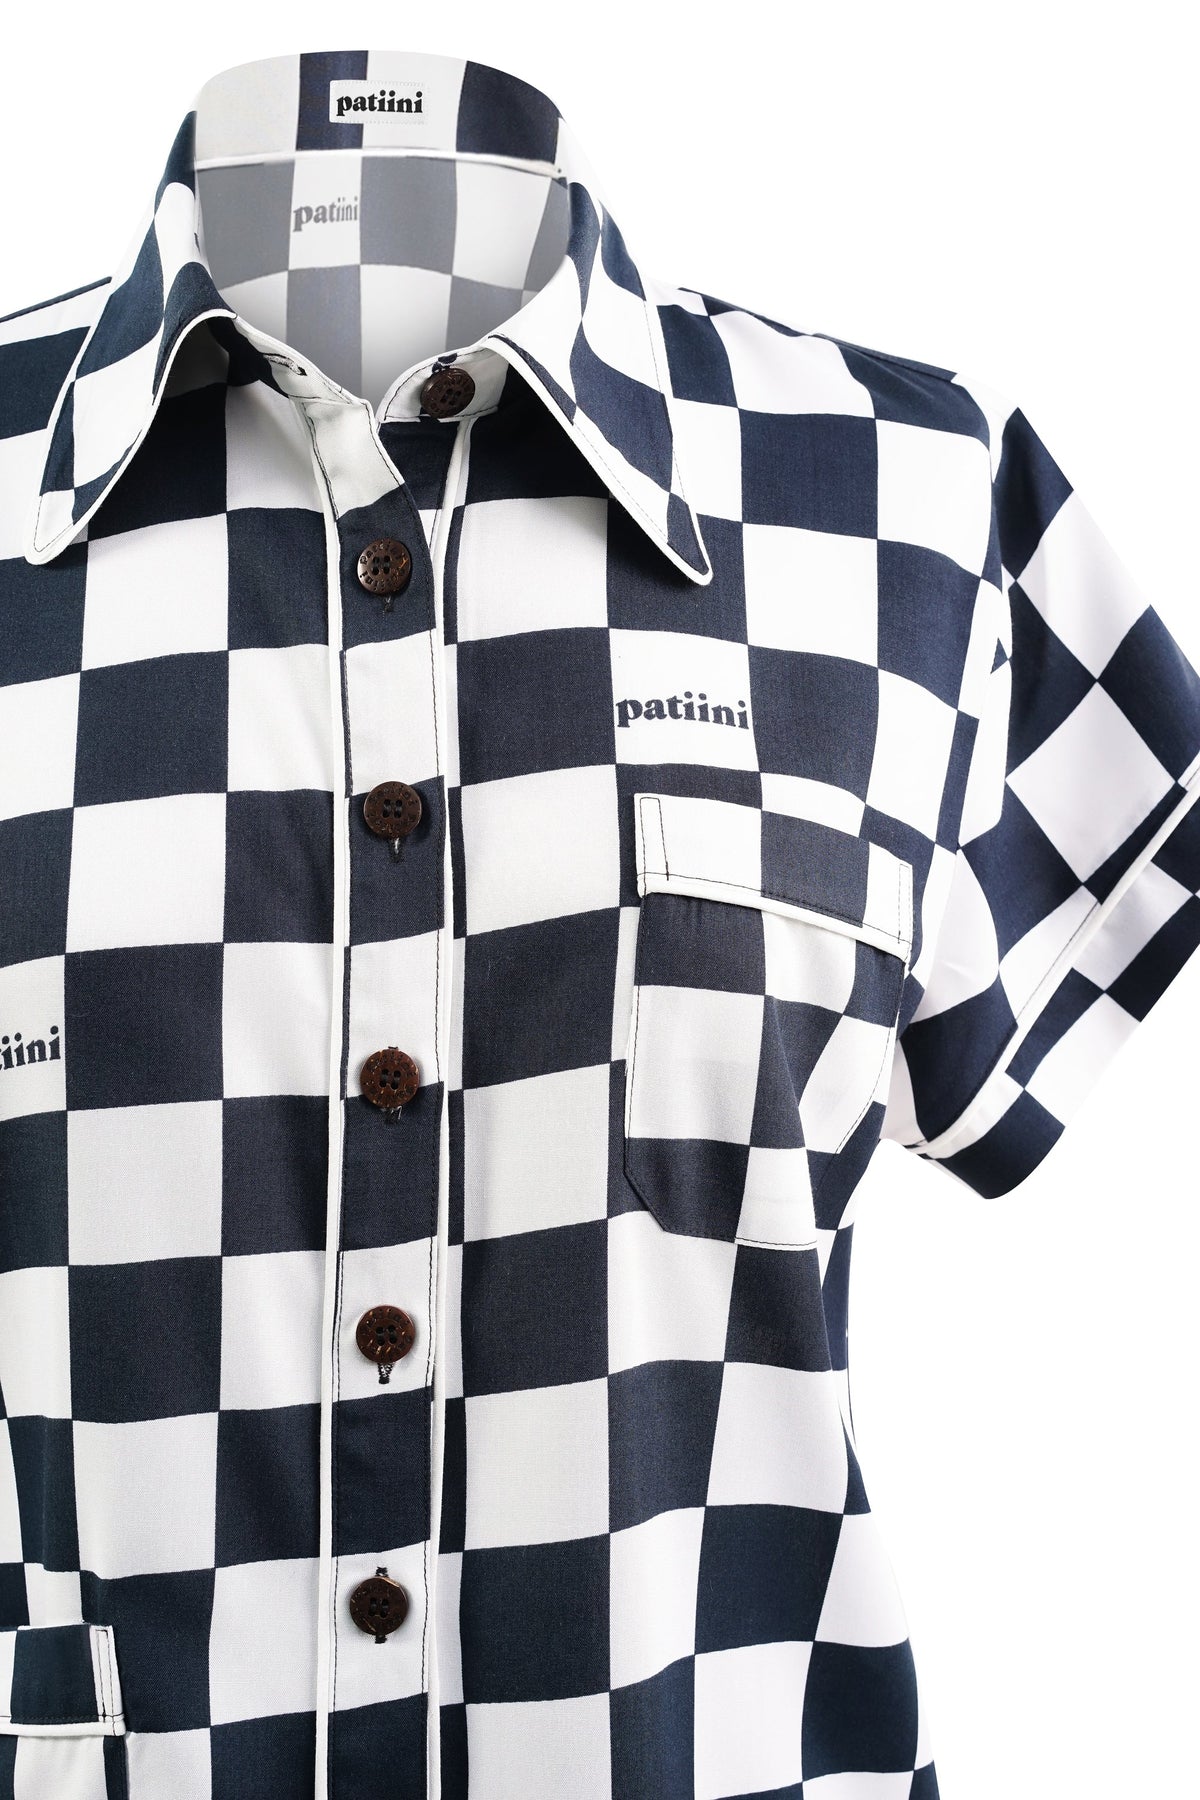 Close-up of black and white checkered button-down shirt.